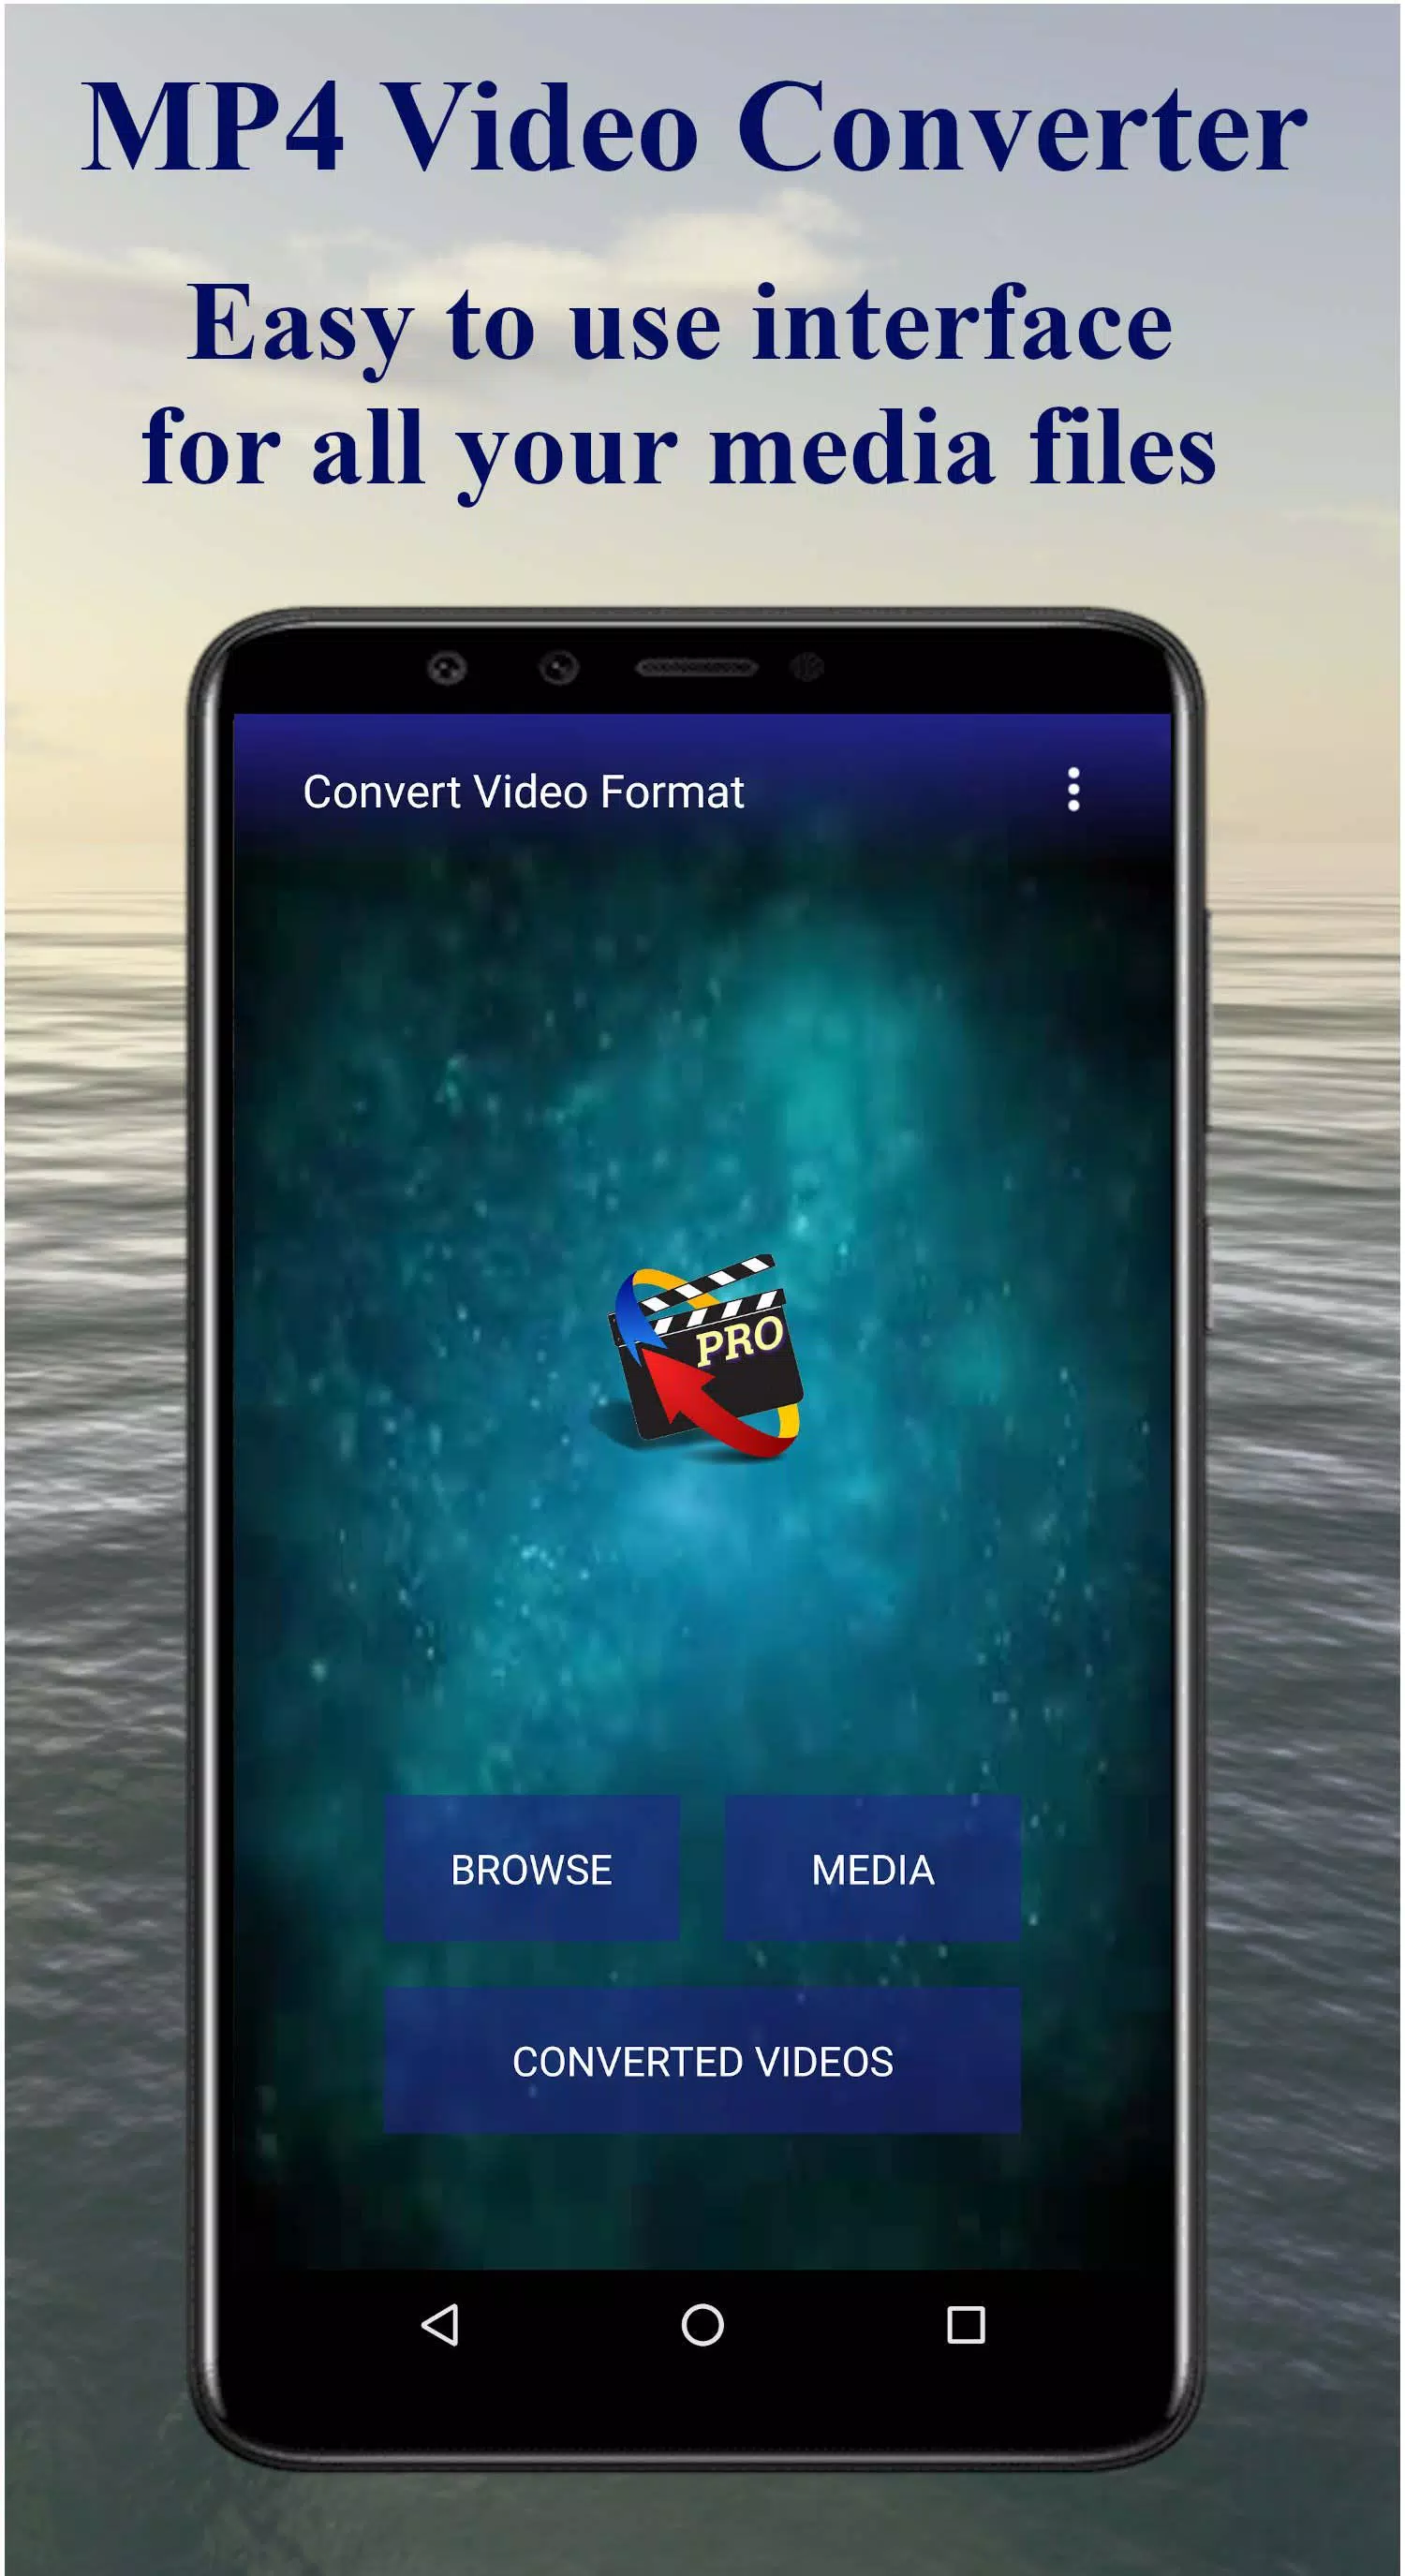 Mp4 Video Converter for Android - APK Download